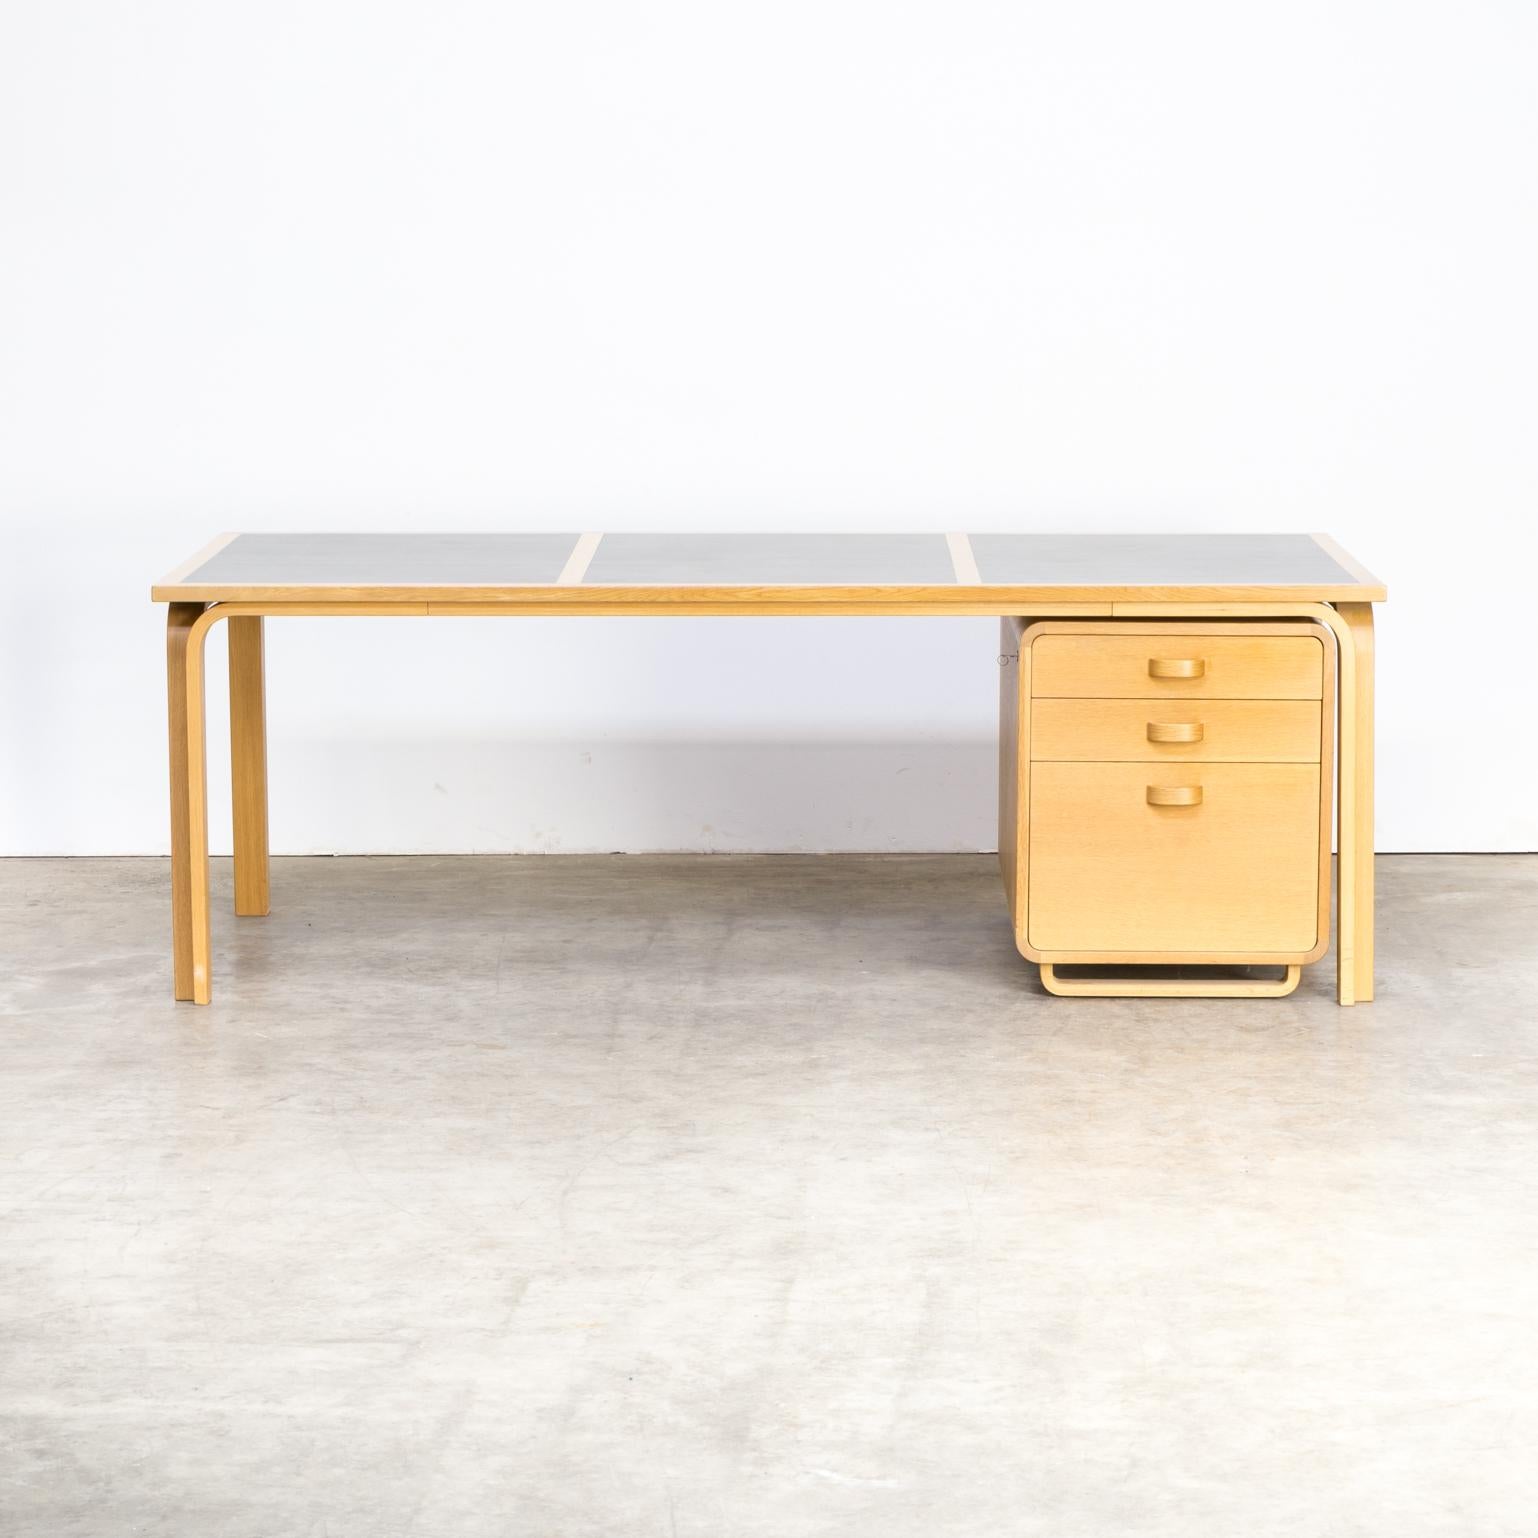 1960s Rud Thygesen & Johnny Sørensen writing desk for Magnus Olesen. Good condition of both desktable and drawerblock, wear consistent with age and use. This lot concerns the writing desk without the chair on the first picture.